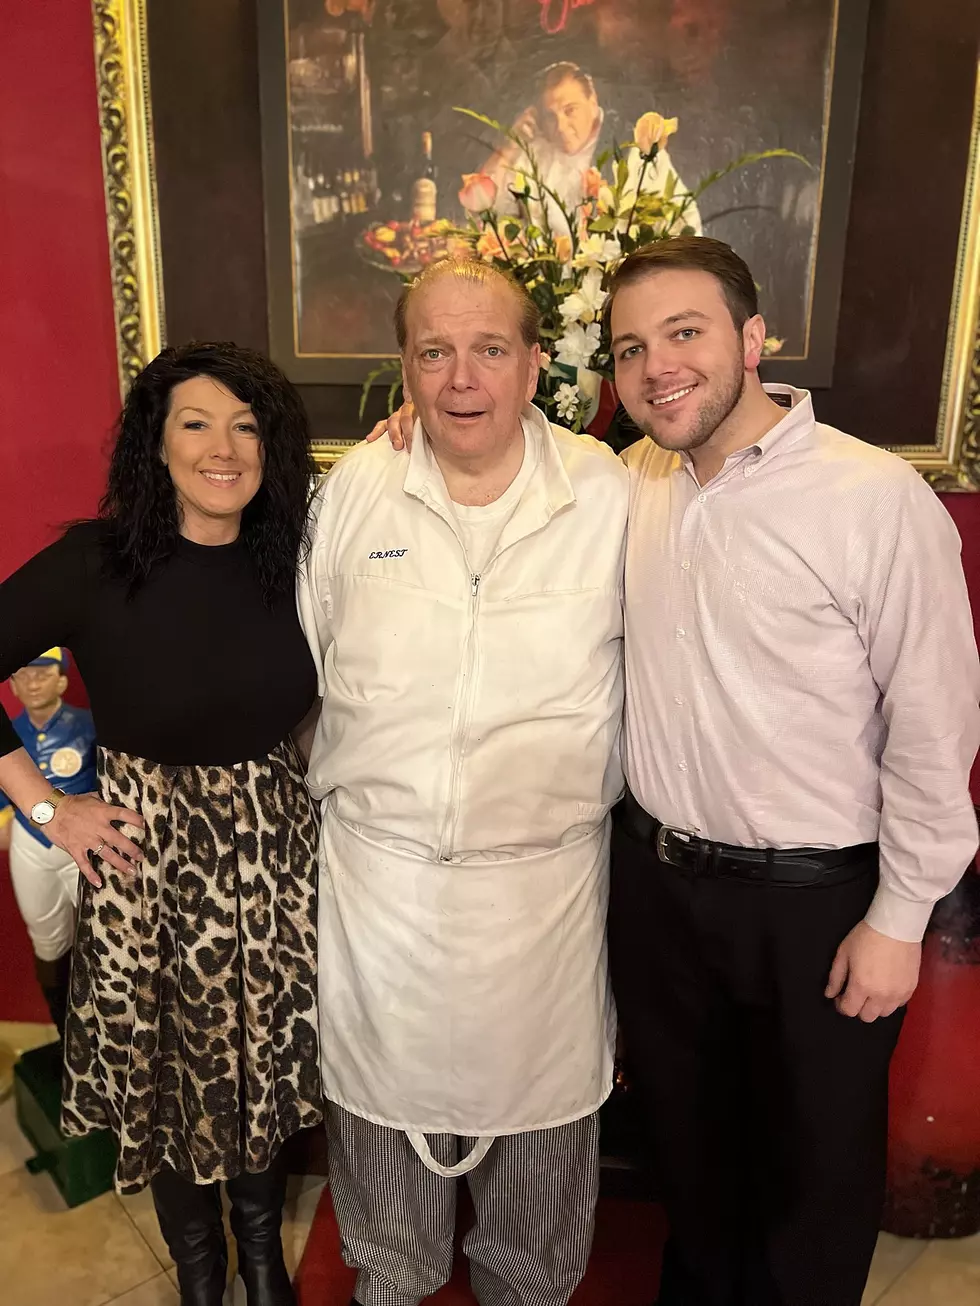 Chef Ernest Palmisano is this Week's Caught in the Act Recipient